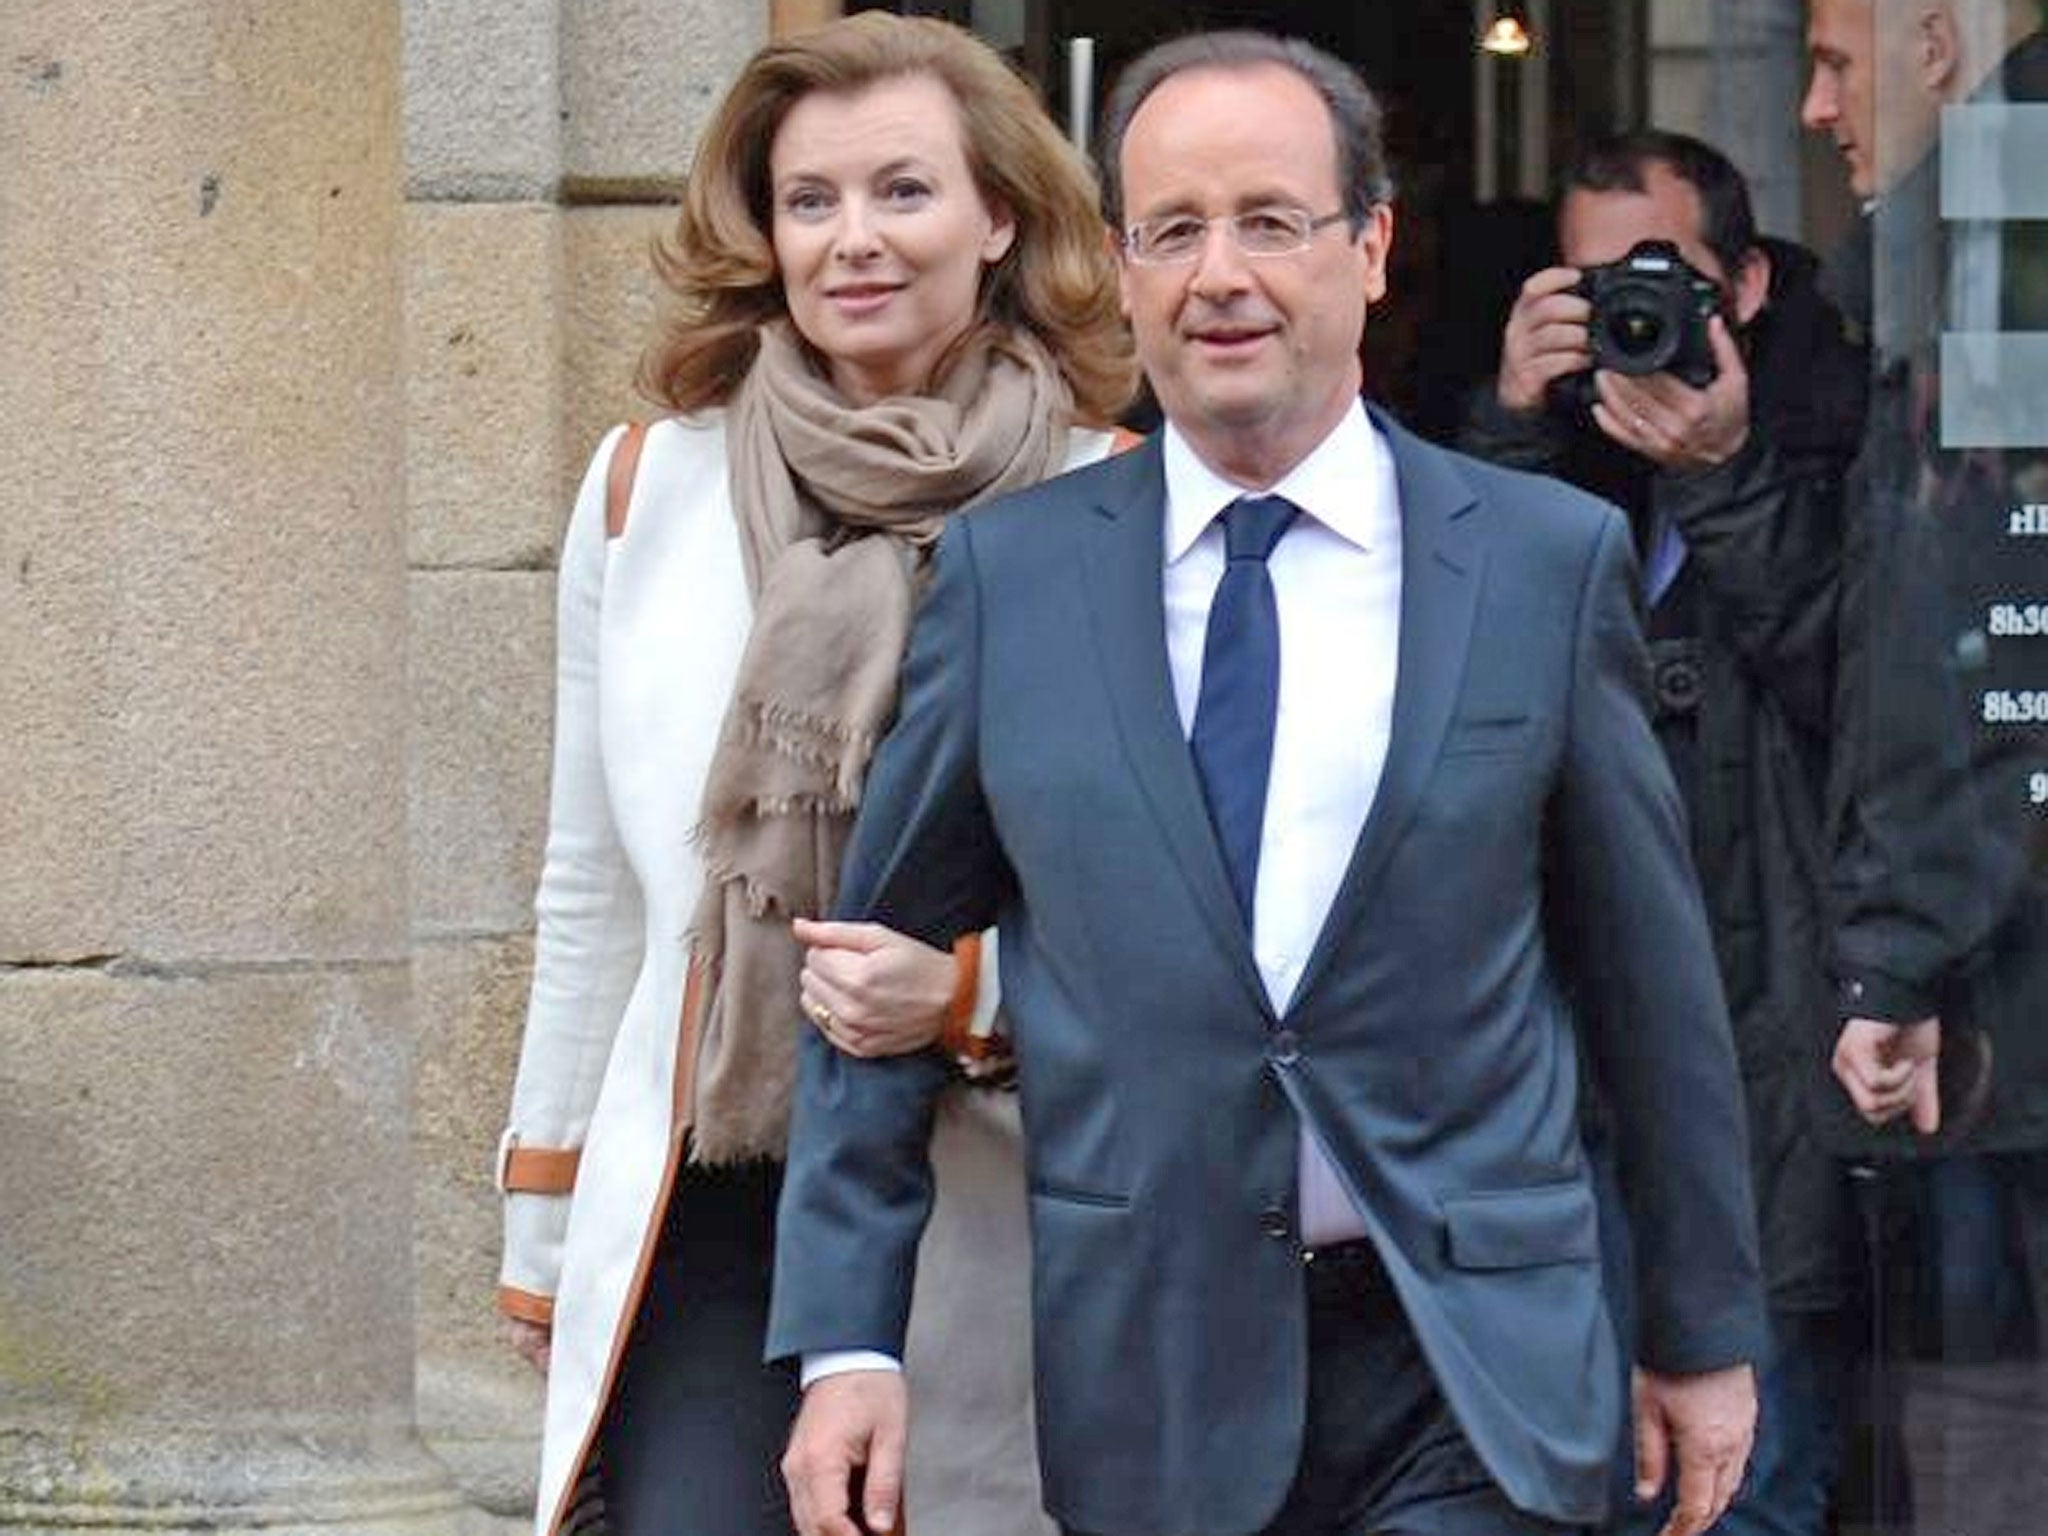 François Hollande’s aides said his letter was a ‘personal testimony’ as a private citizen in the case concerning his girlfriend Valérie Trierweiler